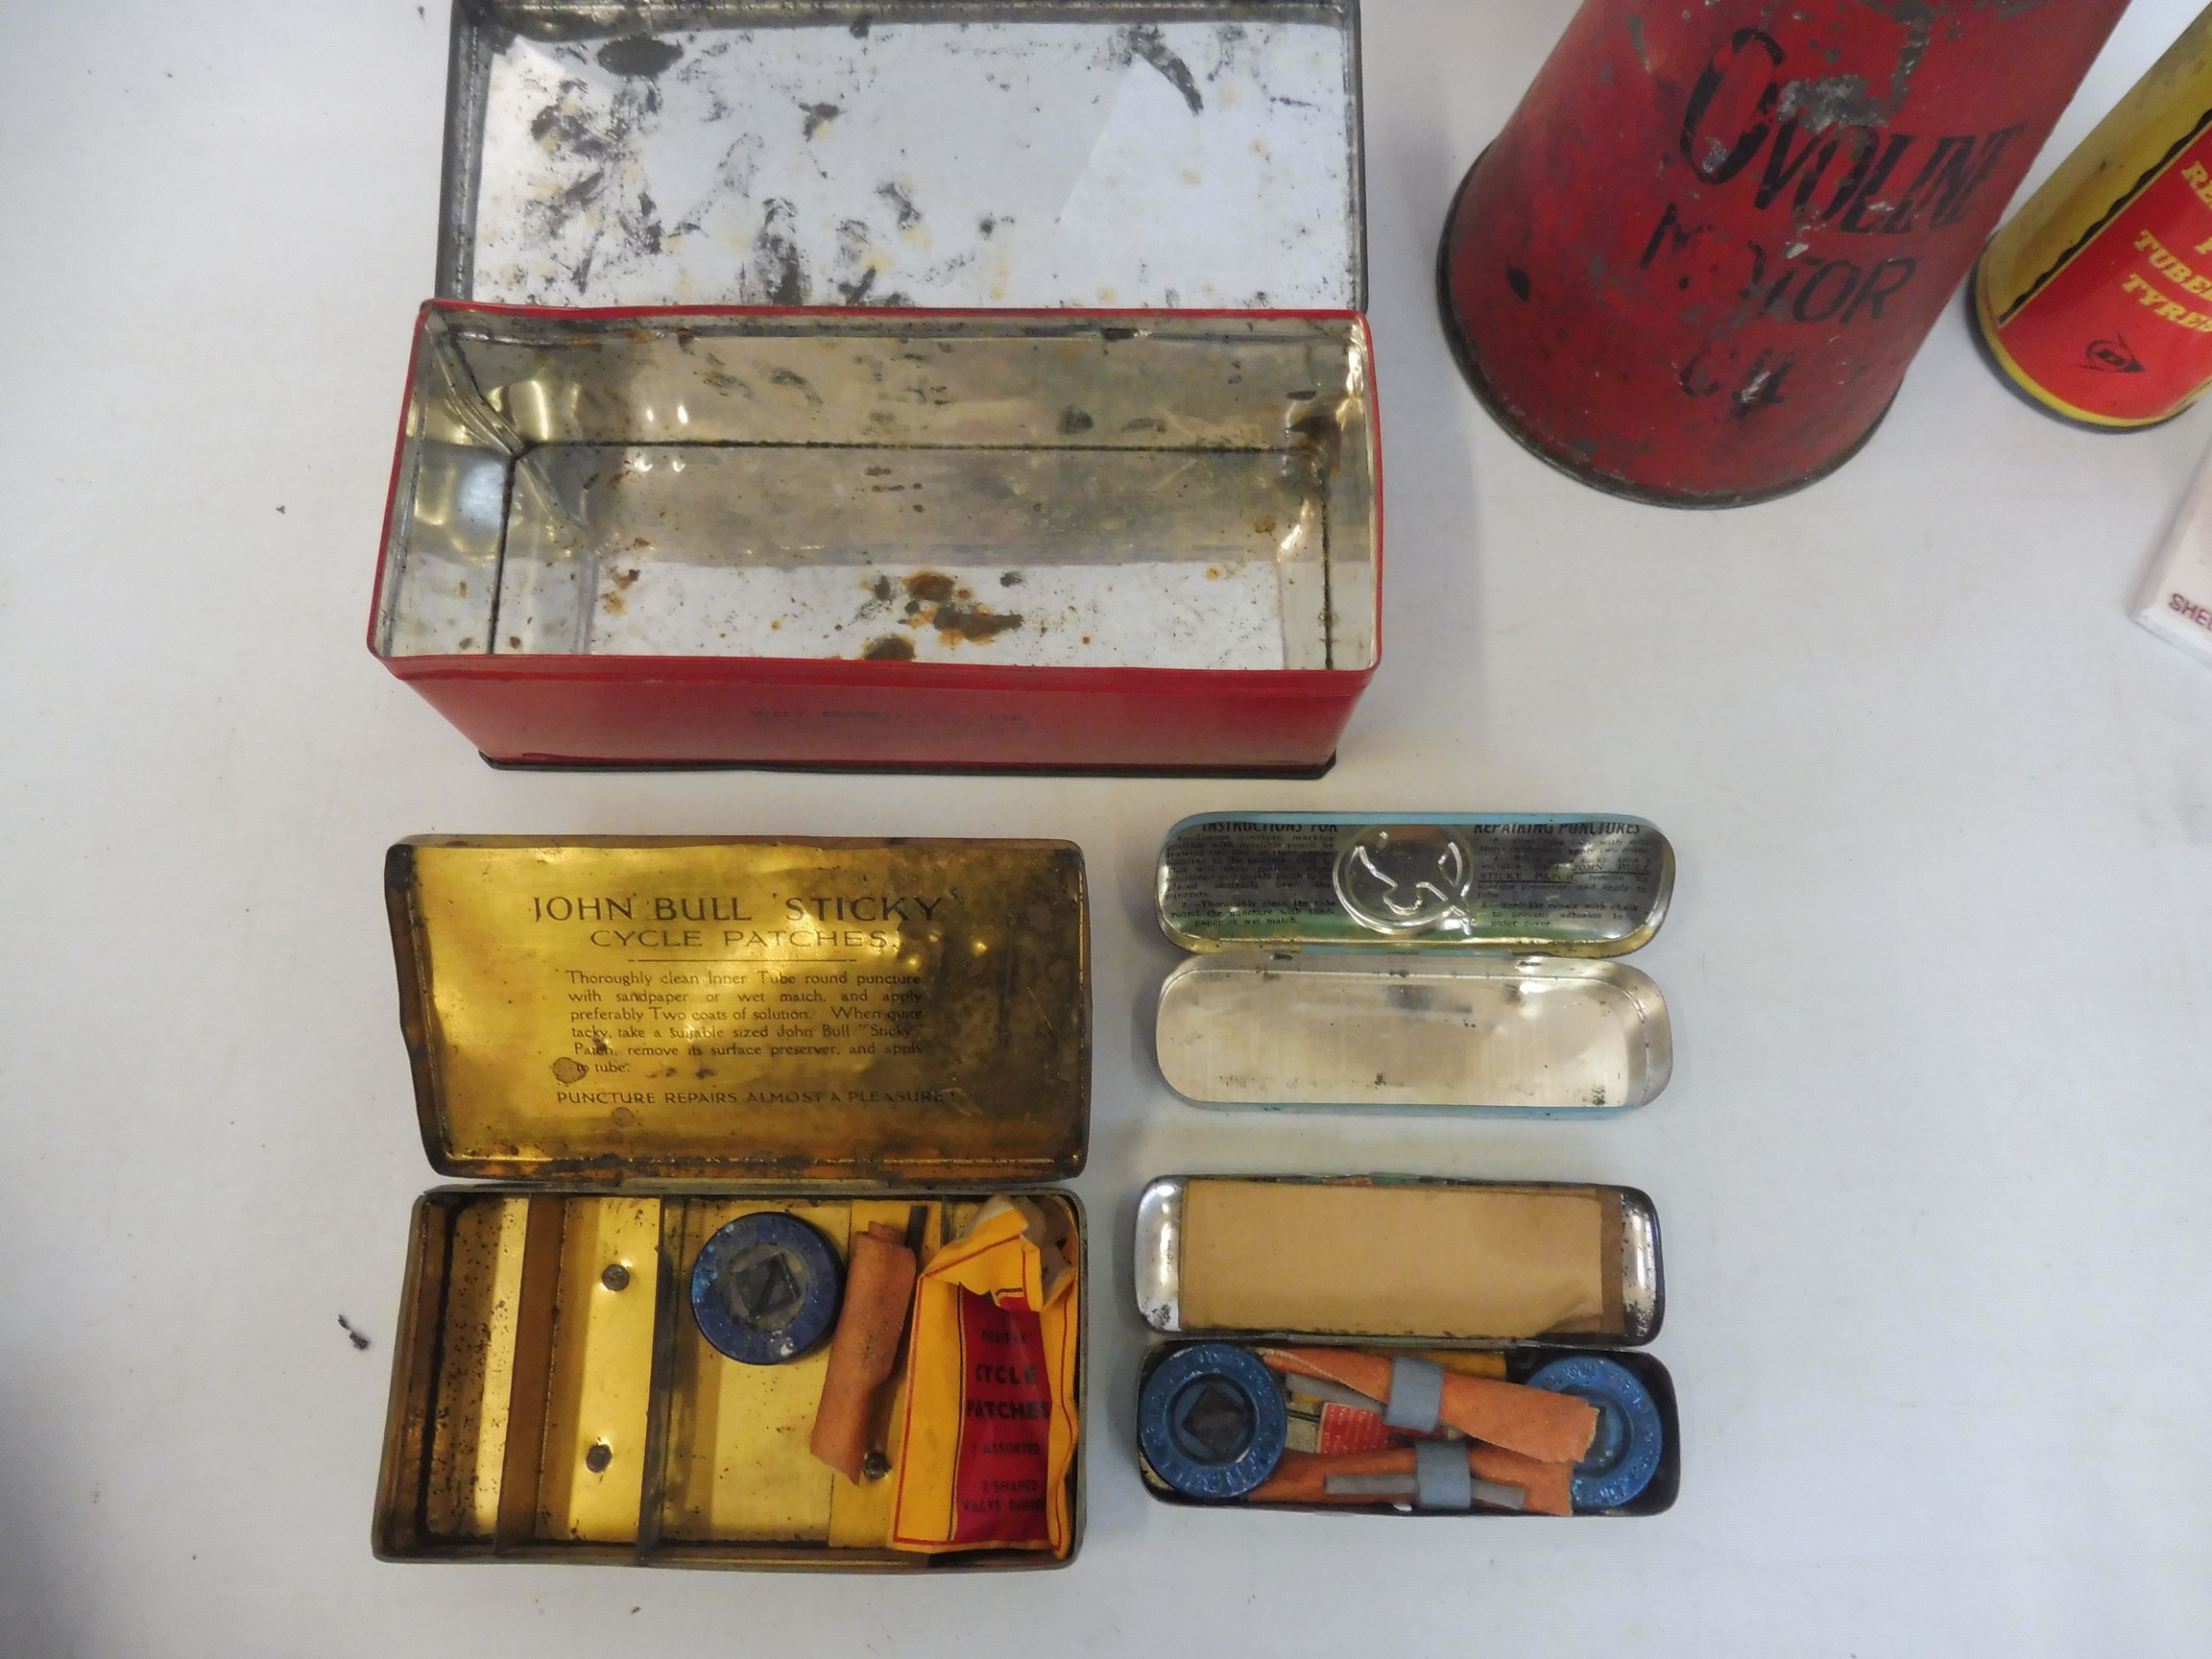 An Ovoline Motor Oil quart measure dated 1935, various John Bull puncture repair kits and other tins - Image 2 of 3